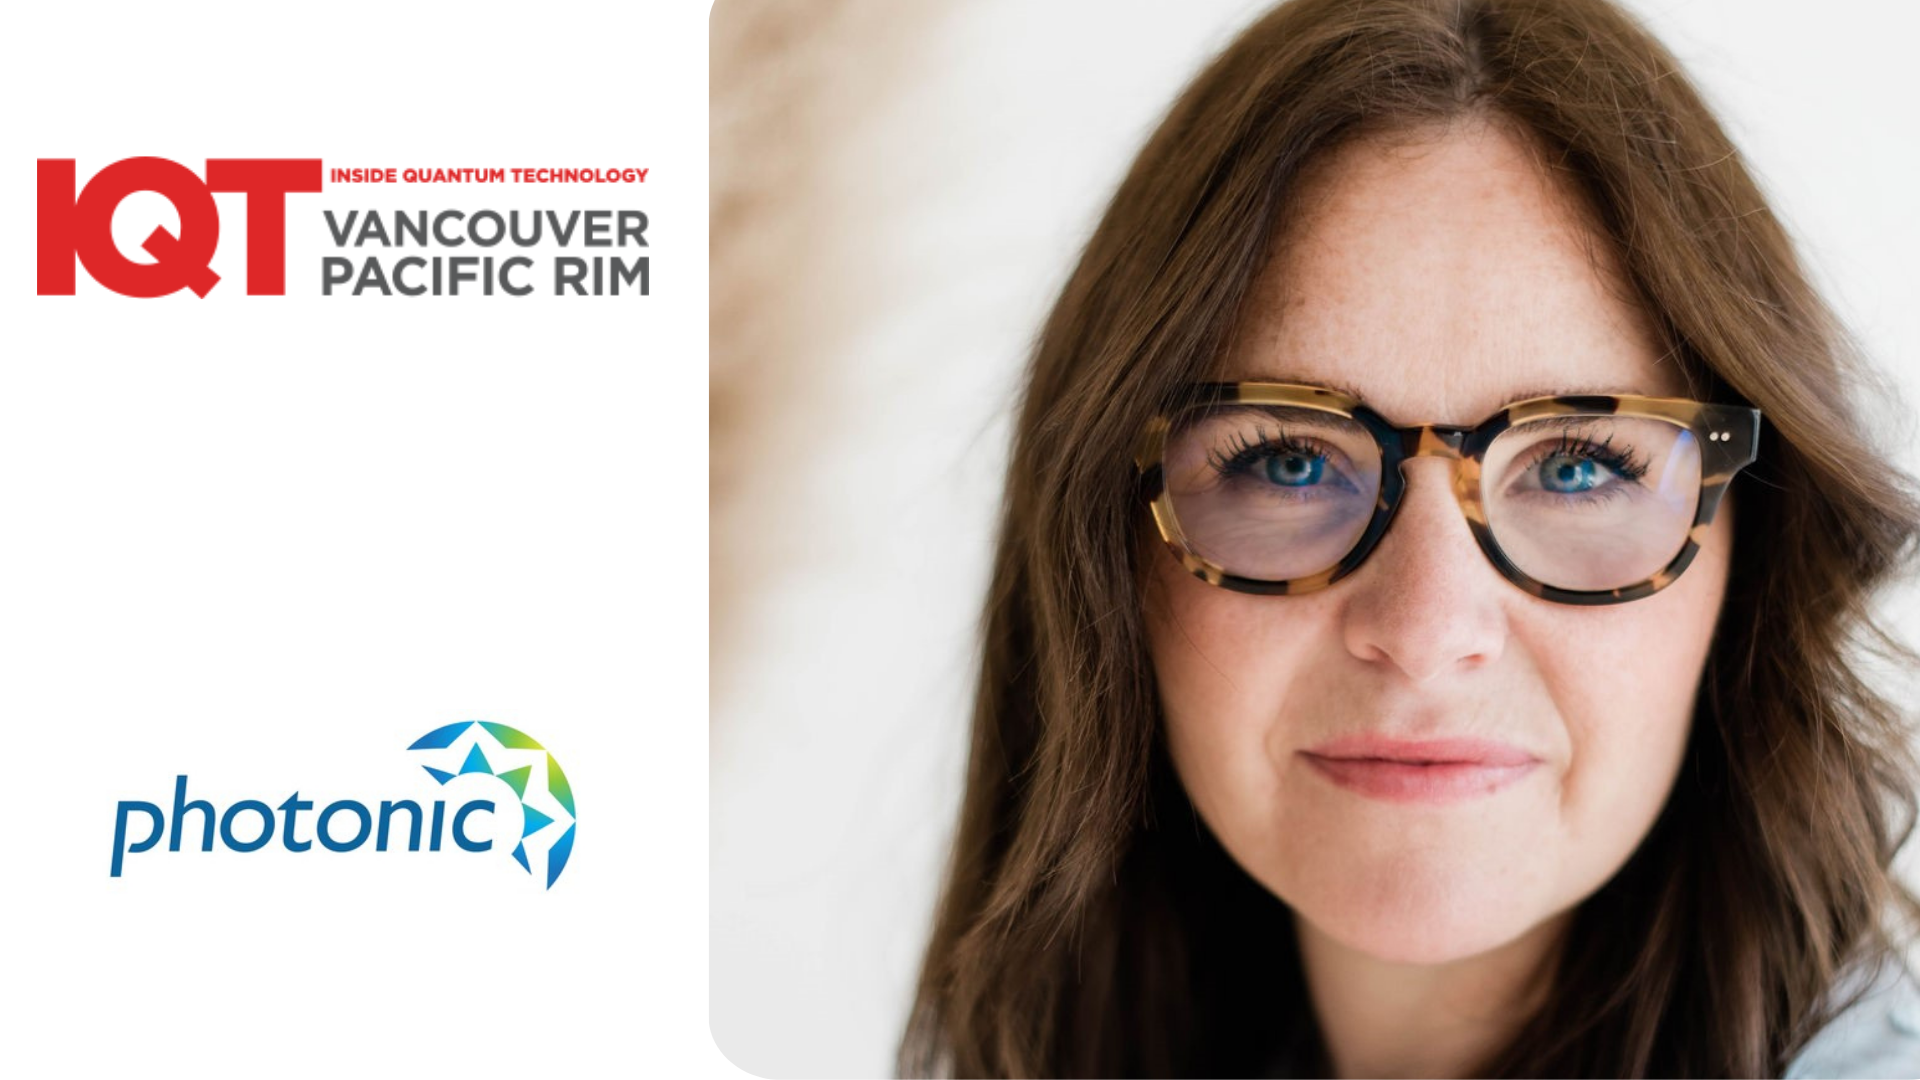 Jessica Hodgson, VP of People at Photonic Inc., is a 2024 Speaker for the IQT Vancouver/Pacific Rim conference happening in June